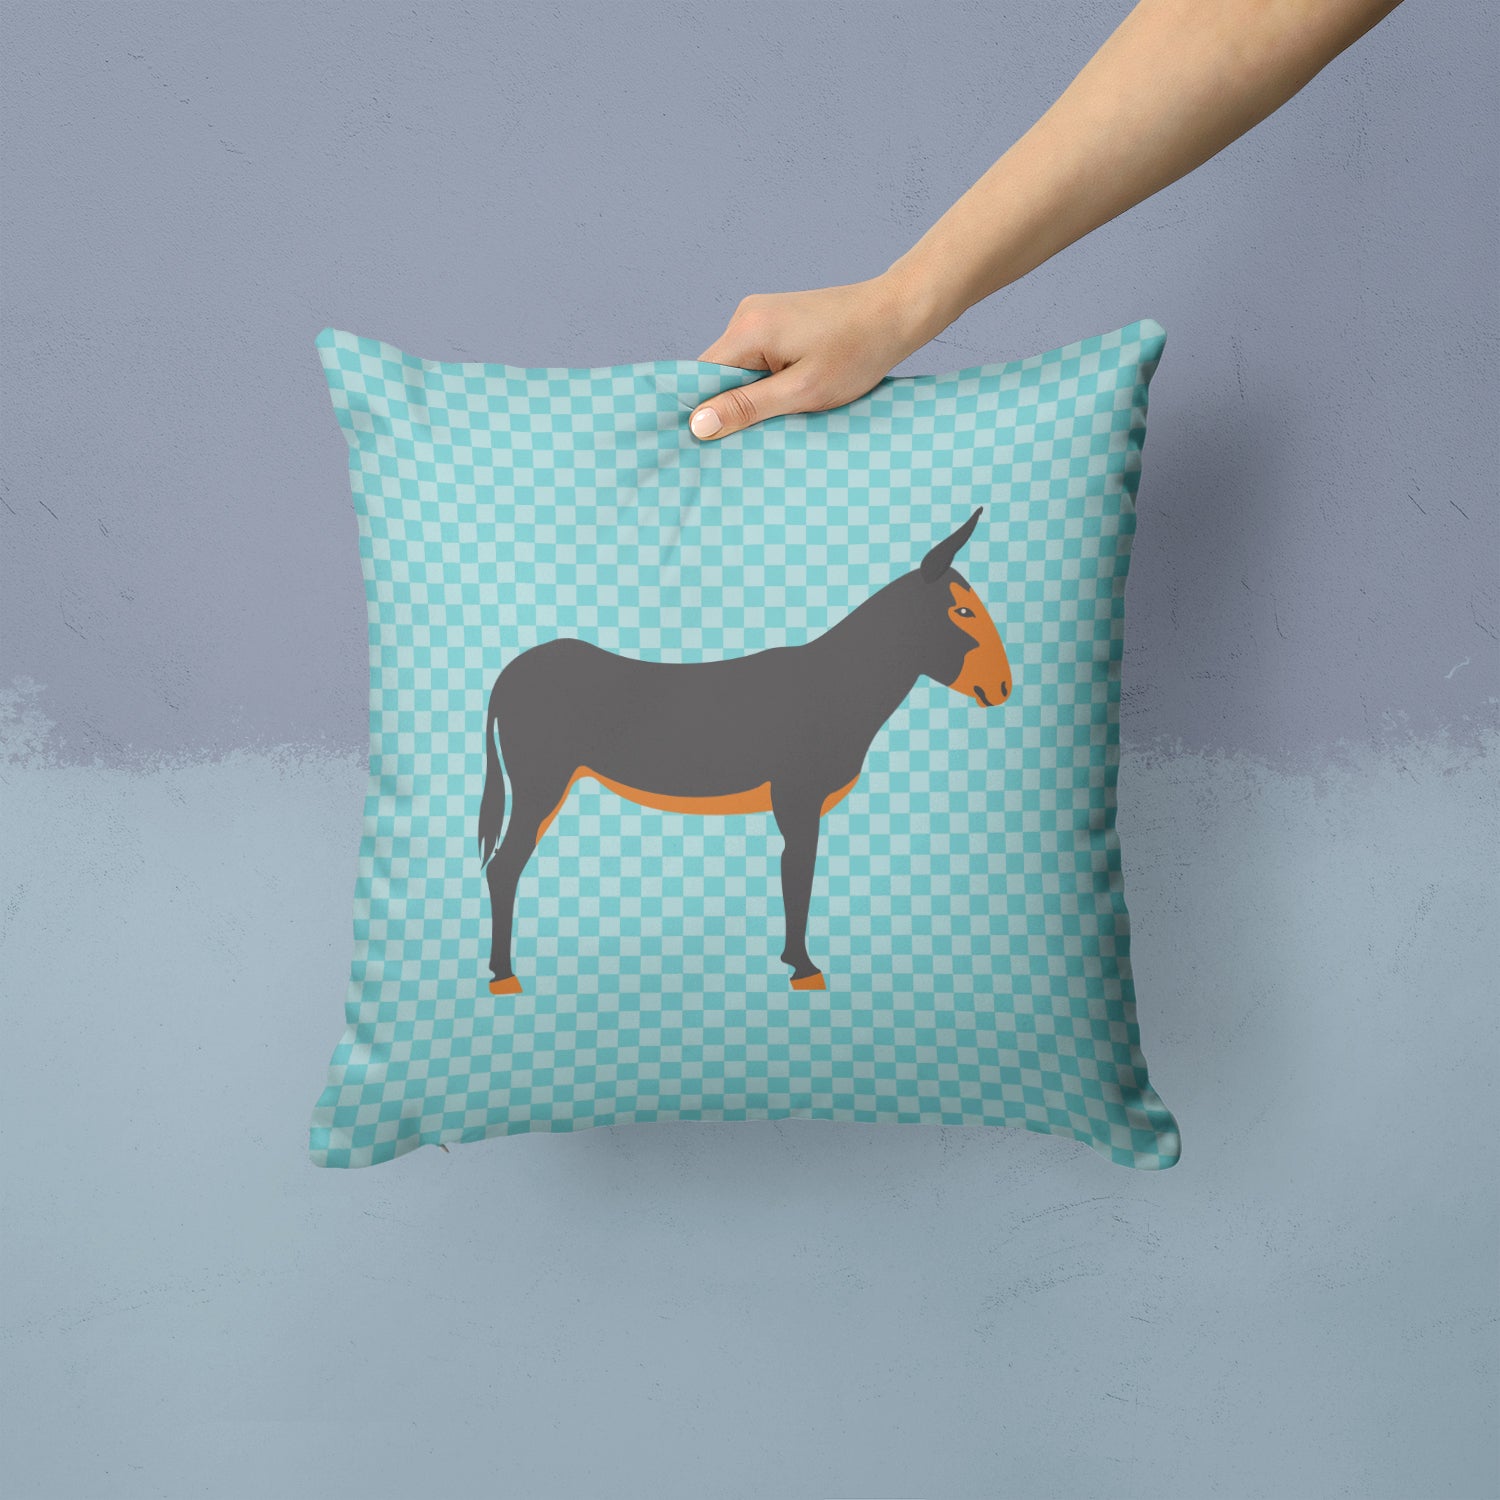 Catalan Donkey Blue Check Fabric Decorative Pillow BB8029PW1414 - the-store.com